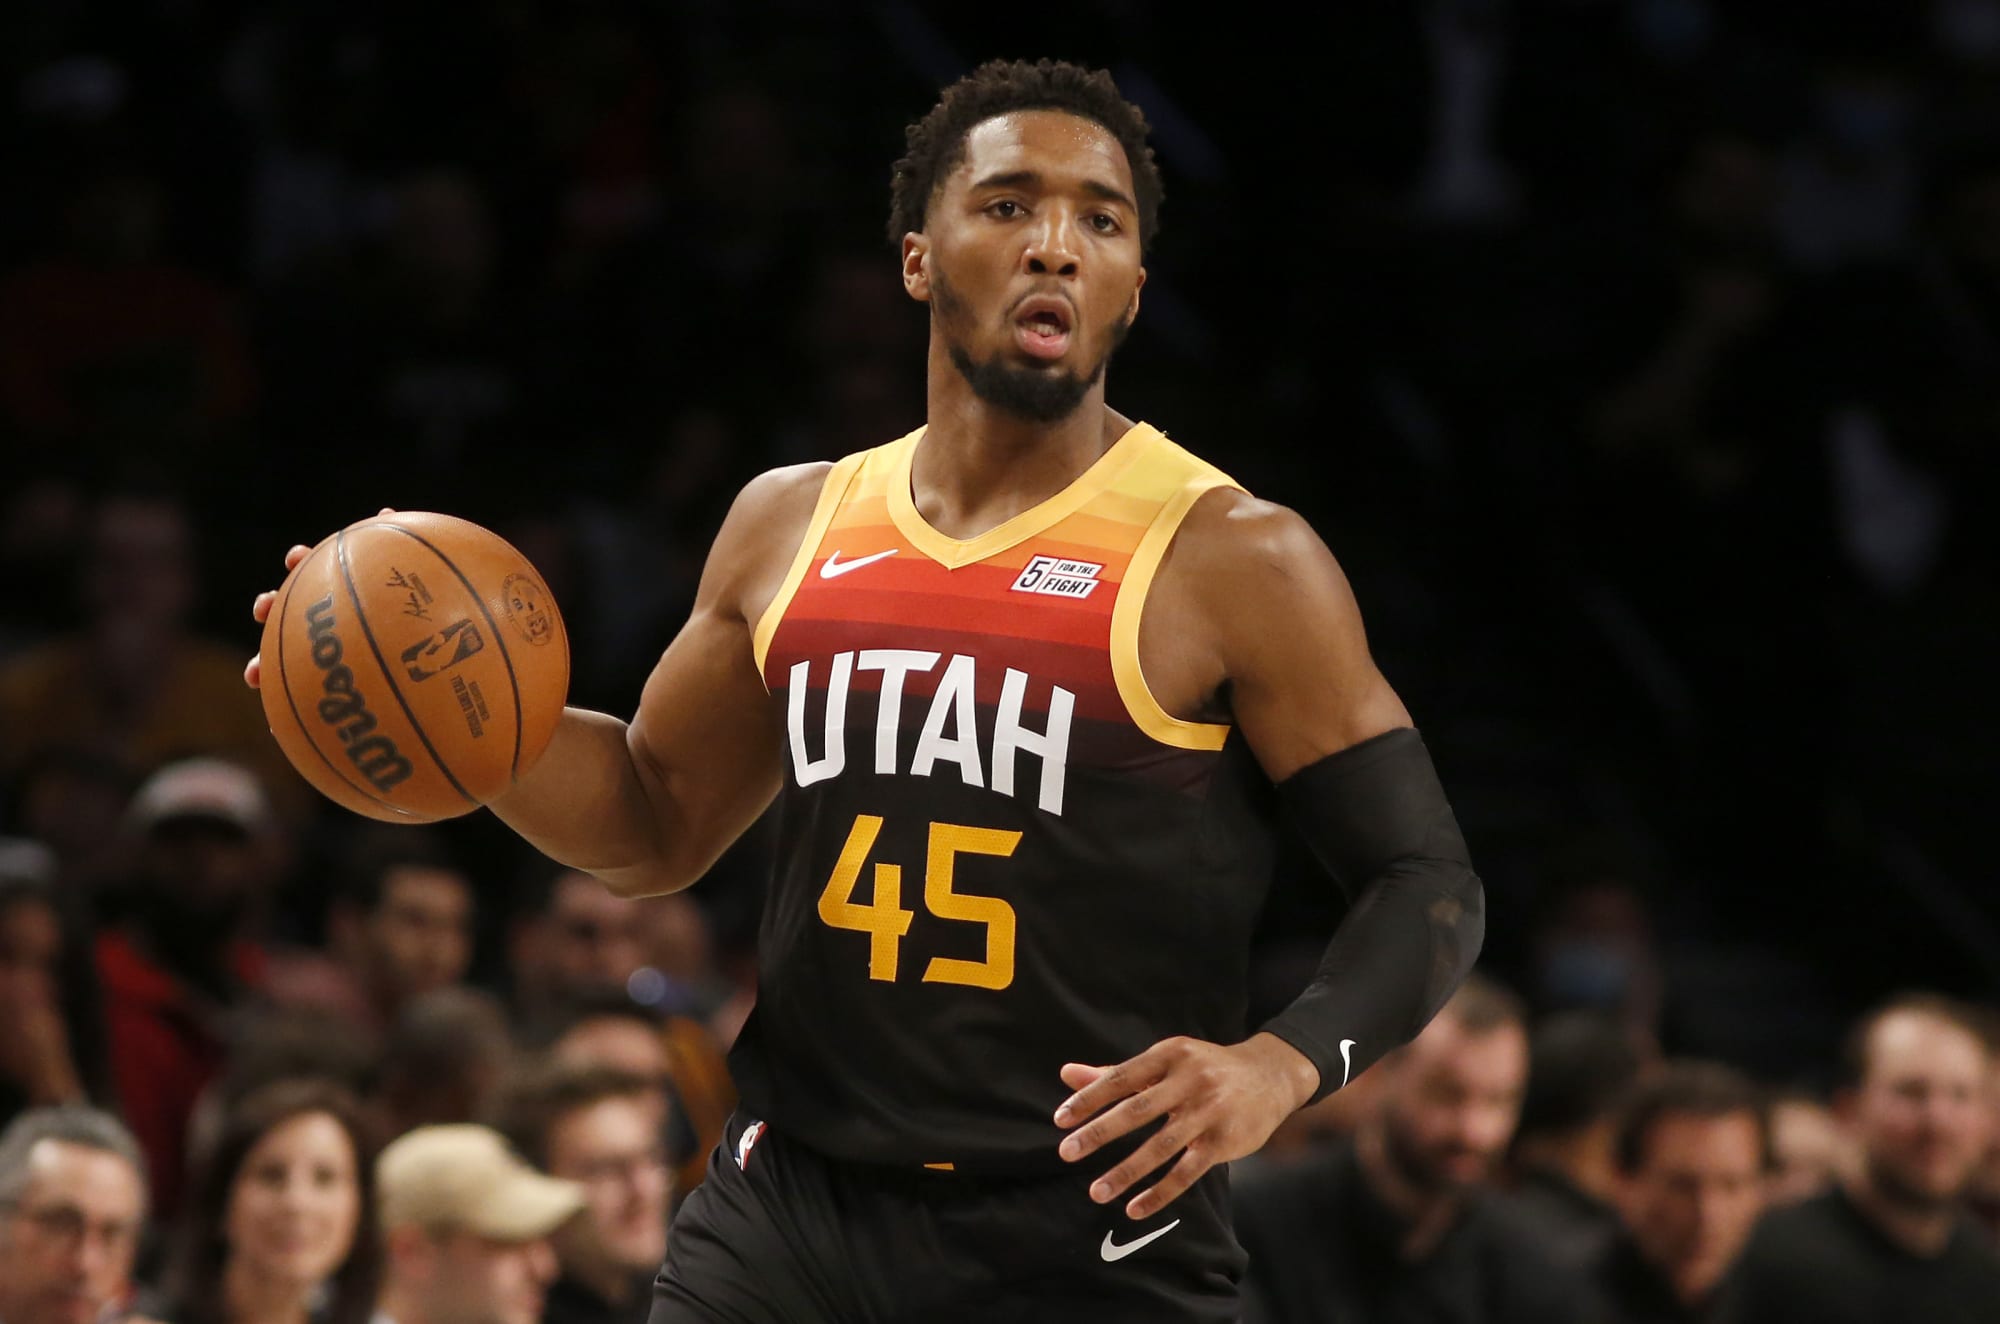 Donovan Mitchell breaks franchise record, leads Cavs past Wizards in OT